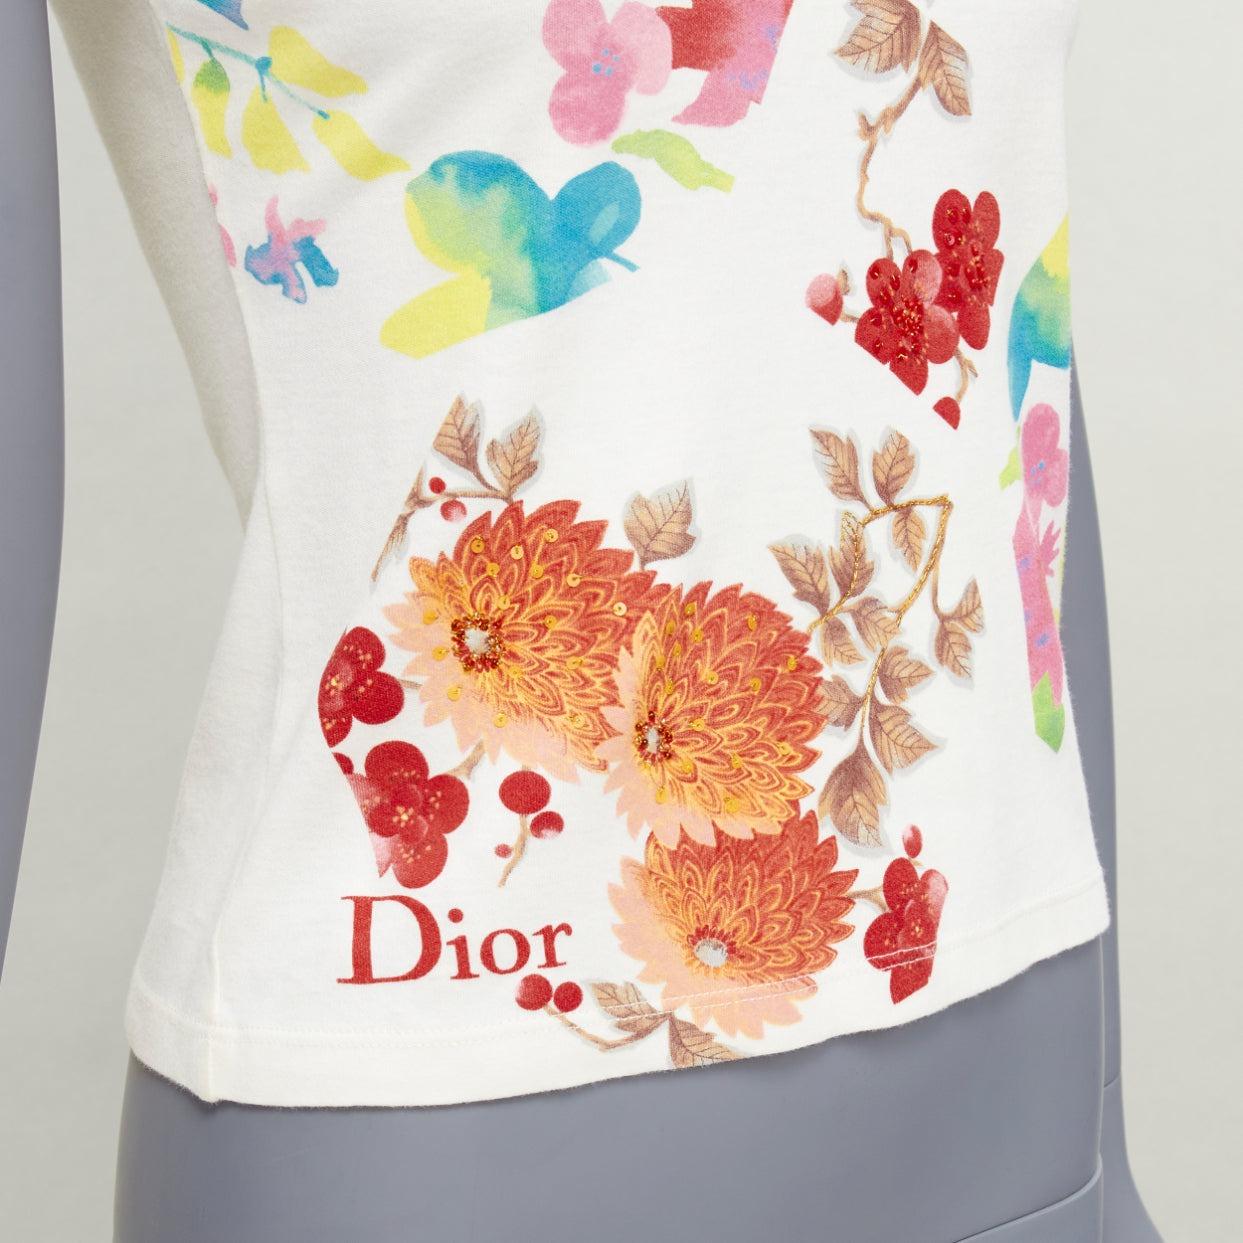 CHRISTIAN DIOR Vintage cream cotton floral print bead embellished lace trim V-neck t-shirt FR38
Reference: TGAS/D00797
Brand: Christian Dior
Designer: John Galliano
Model: 6P16155471
Material: Cotton
Color: Cream, Multicolour
Pattern: Floral
Extra